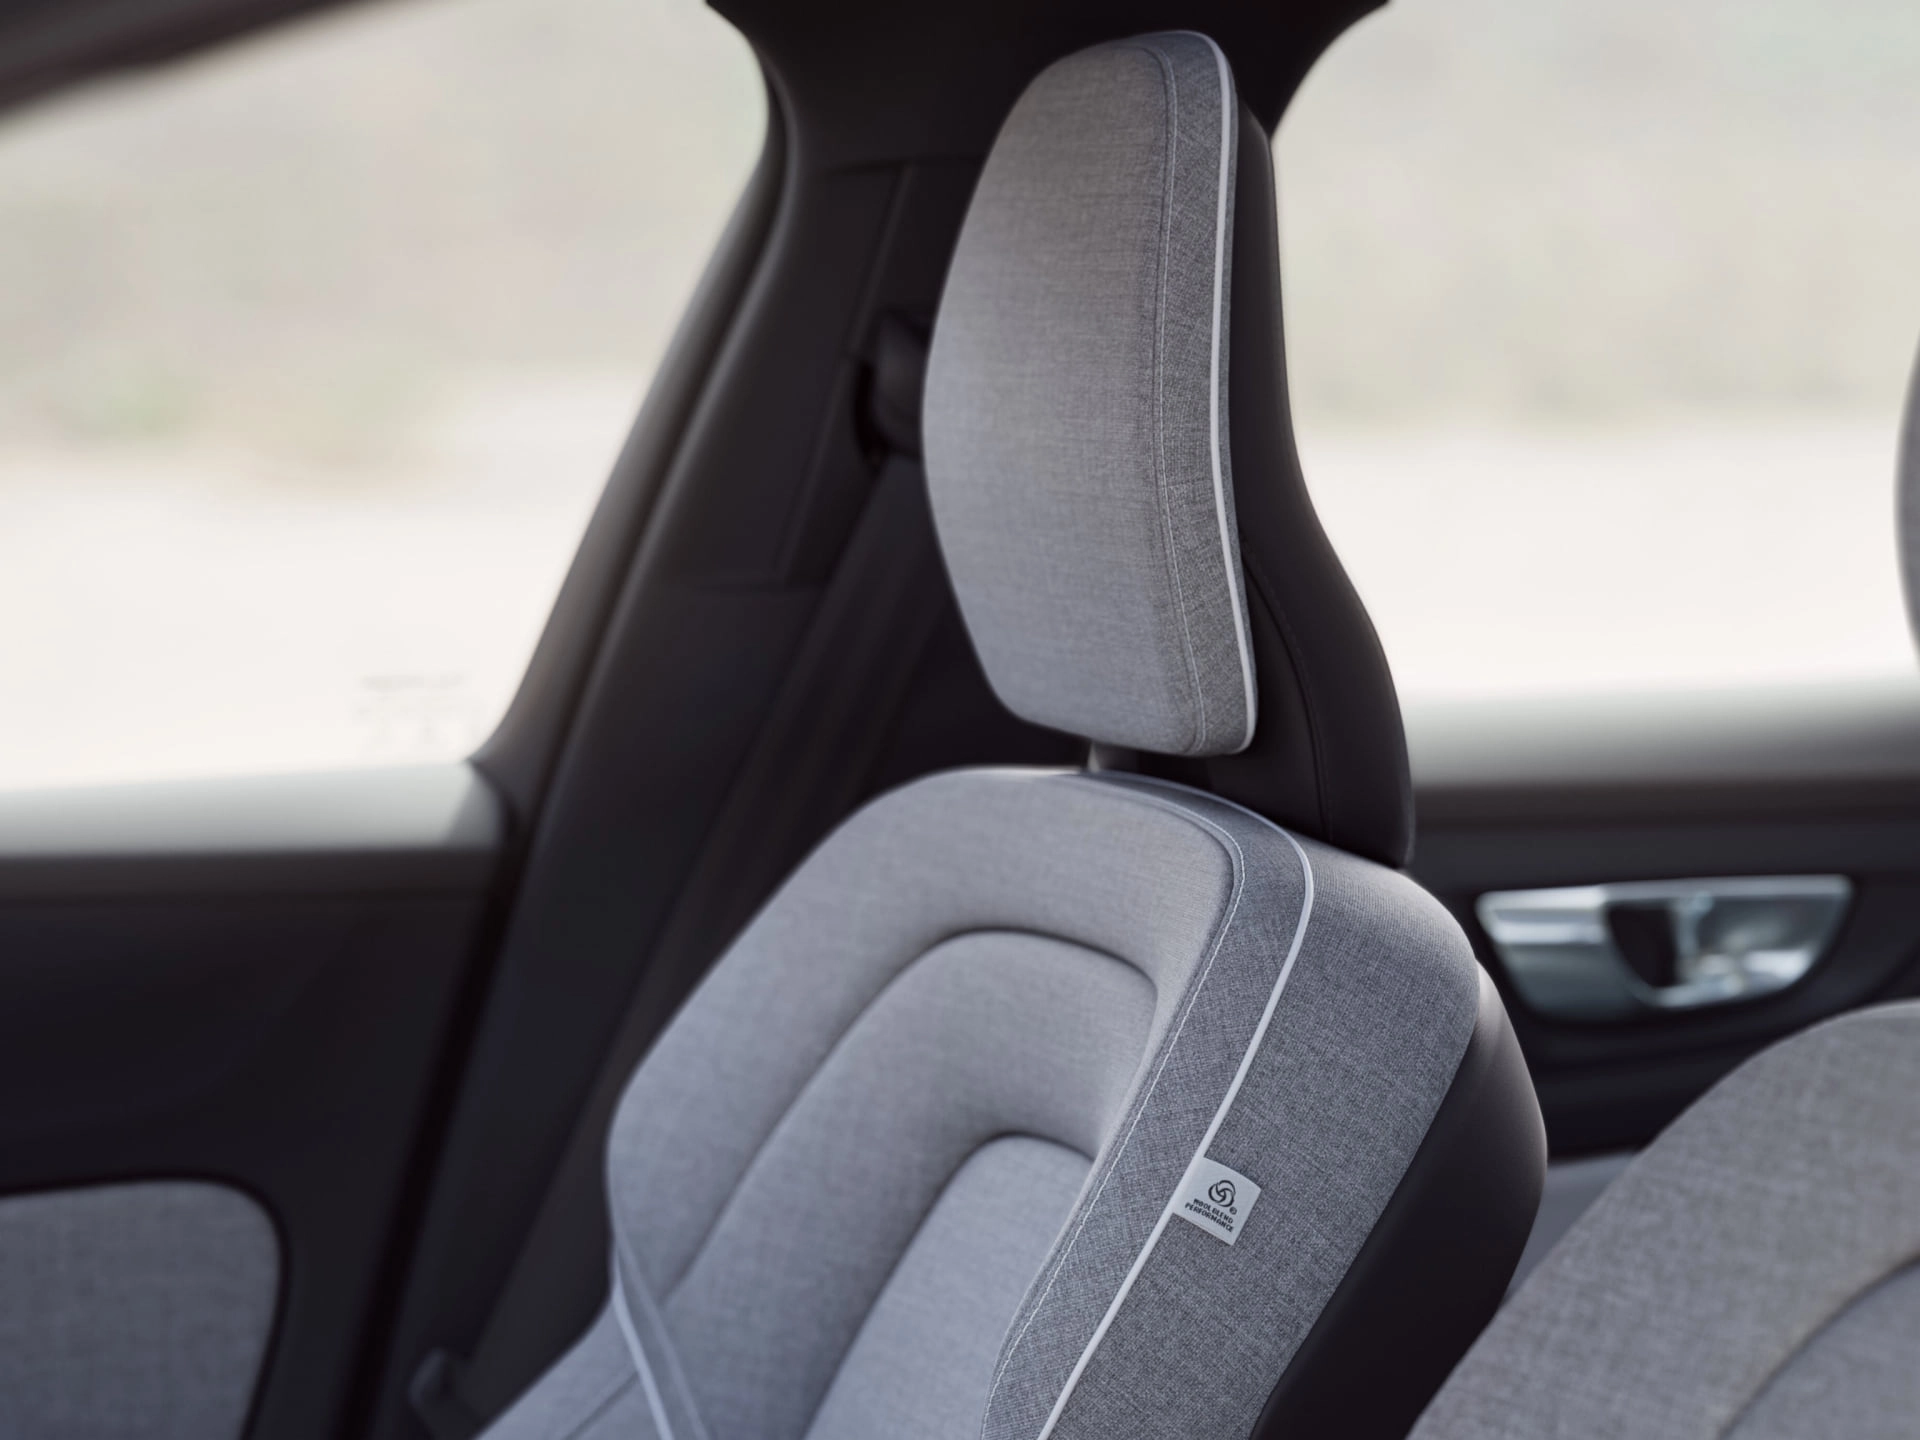 Close-up of an ergonomic upholstered seat in a Volvo sedan.